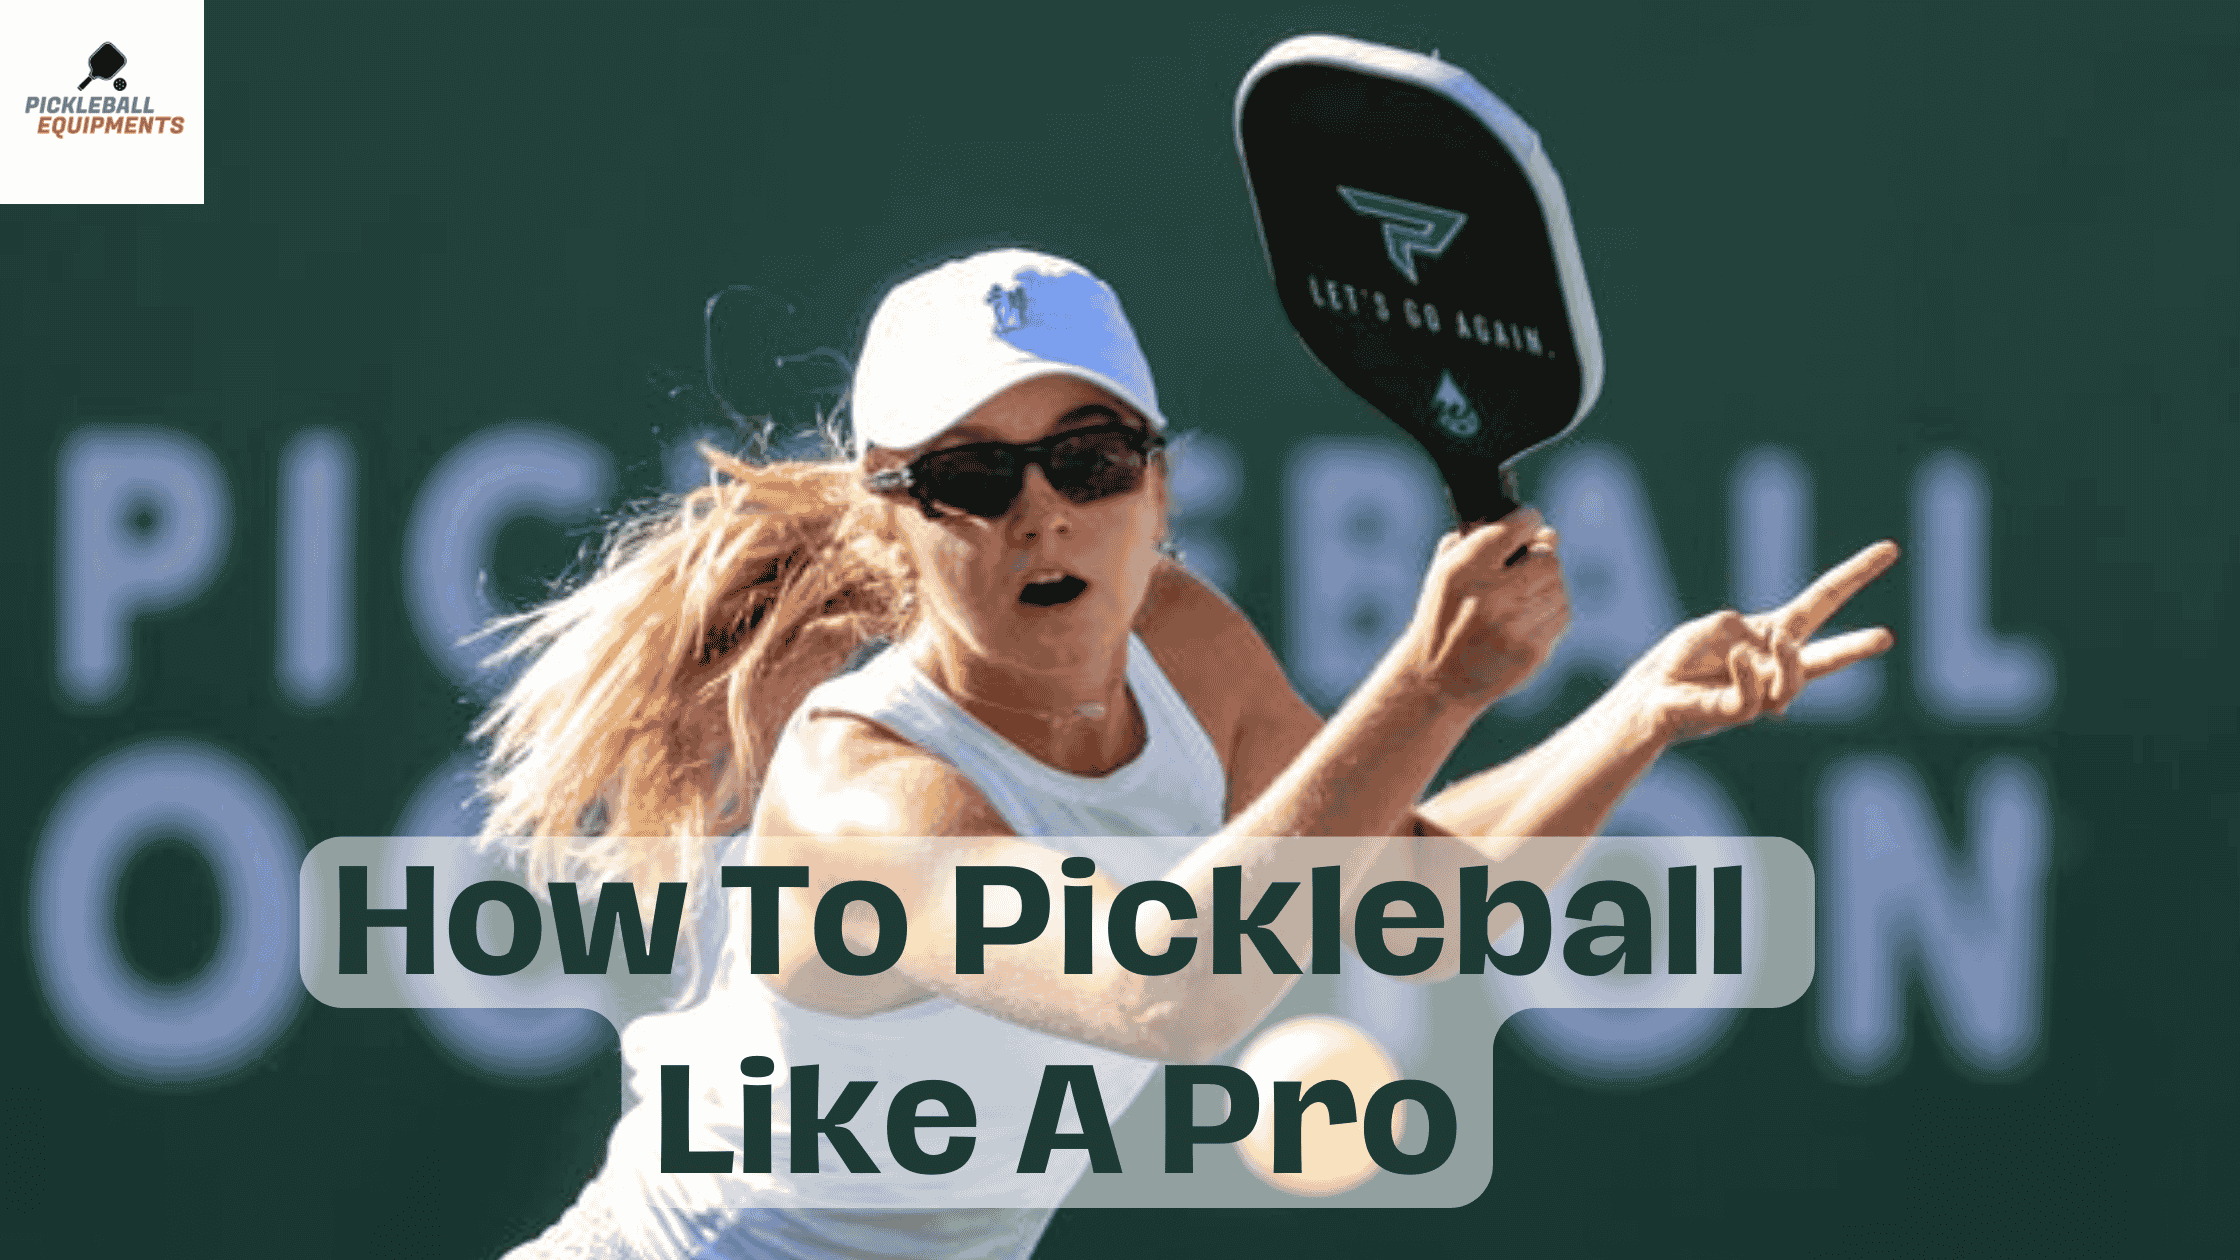 How To Pickleball Like A Pro